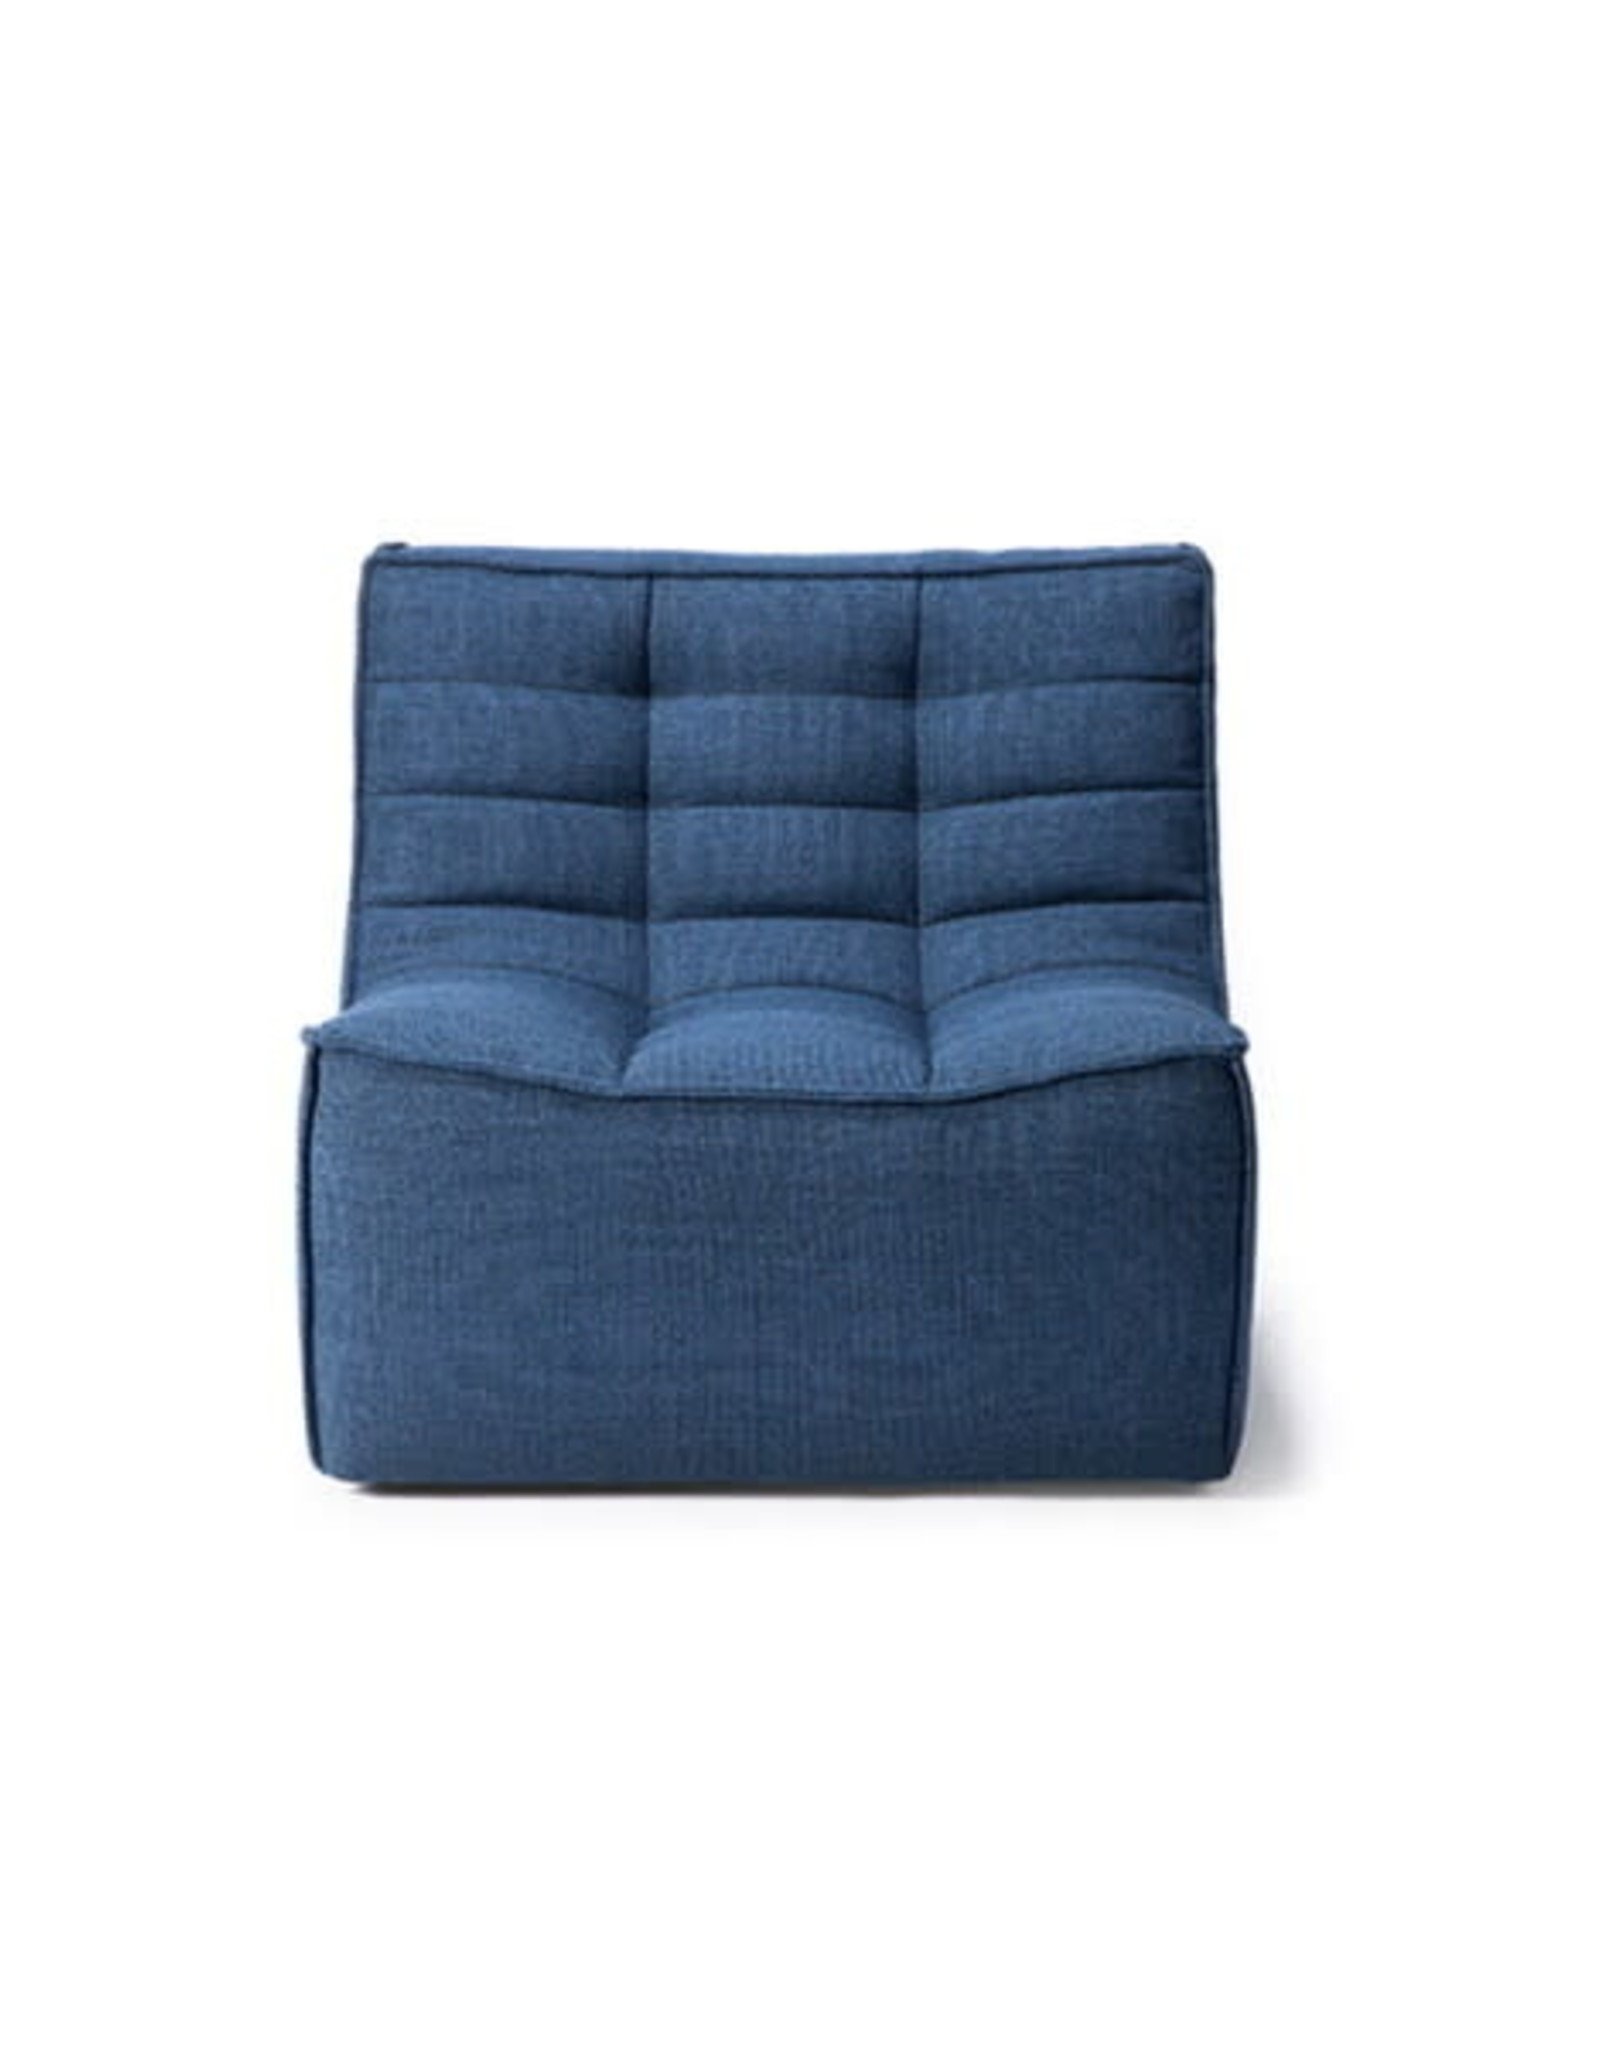 N701 One Seater - Blue